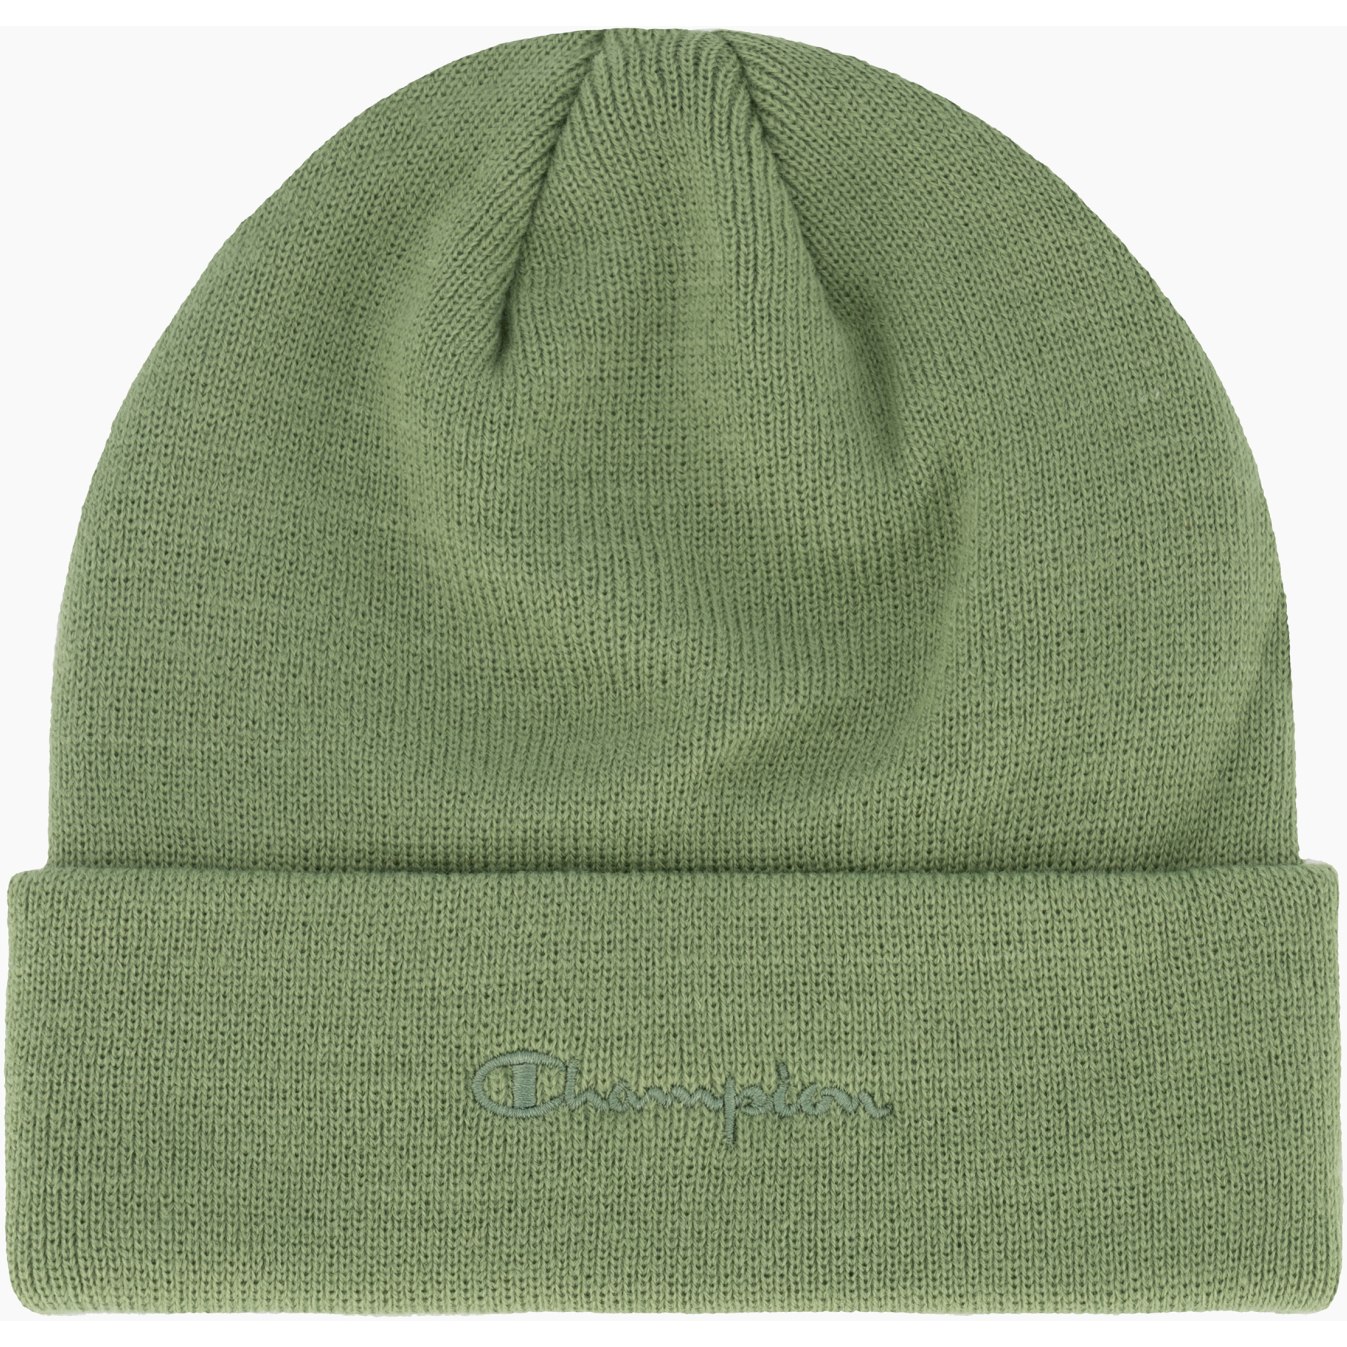 Picture of Champion Legacy Beanie Cap 804671 - loden frost